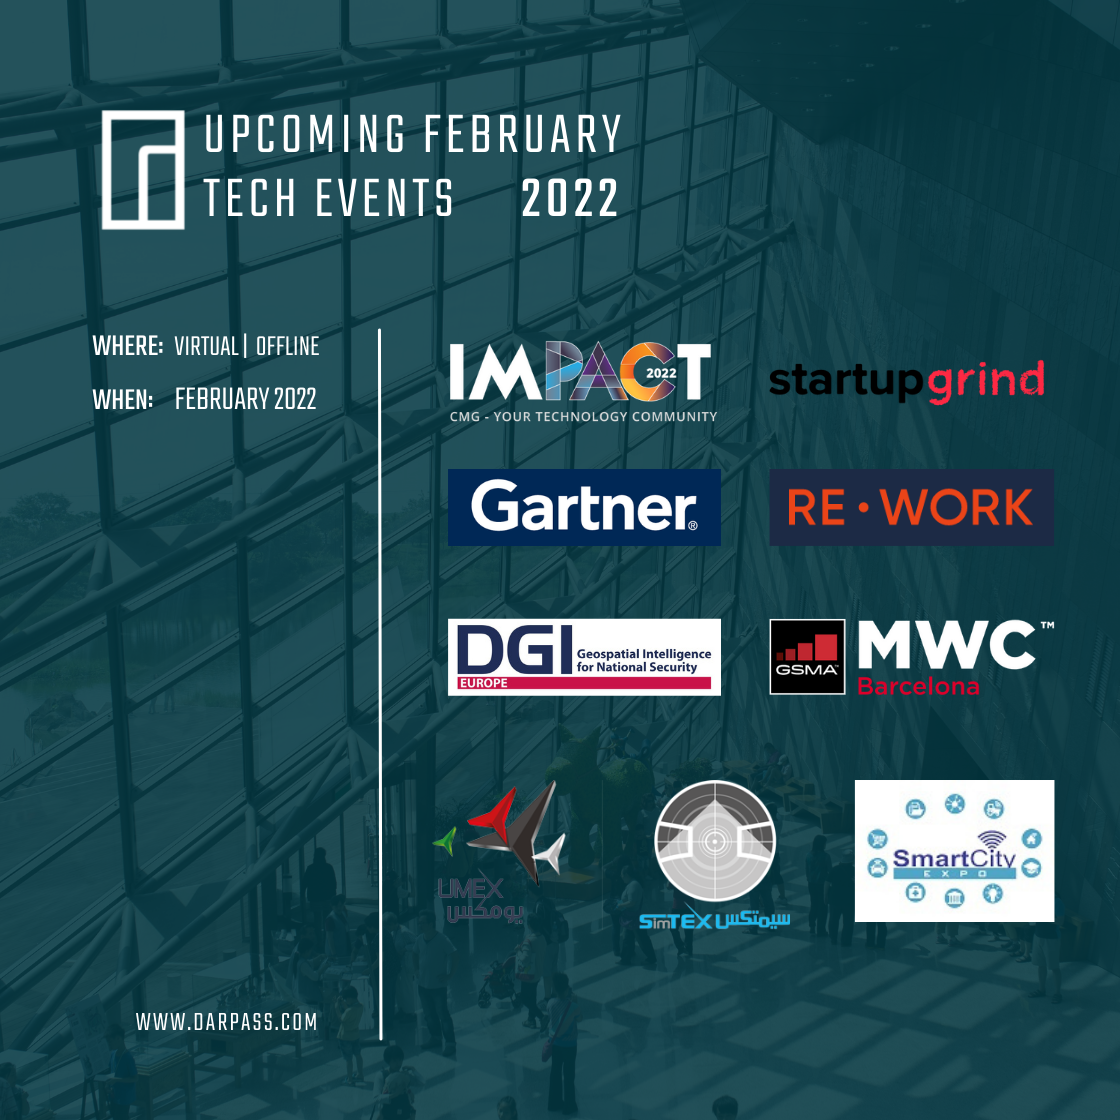 February tech events 2022